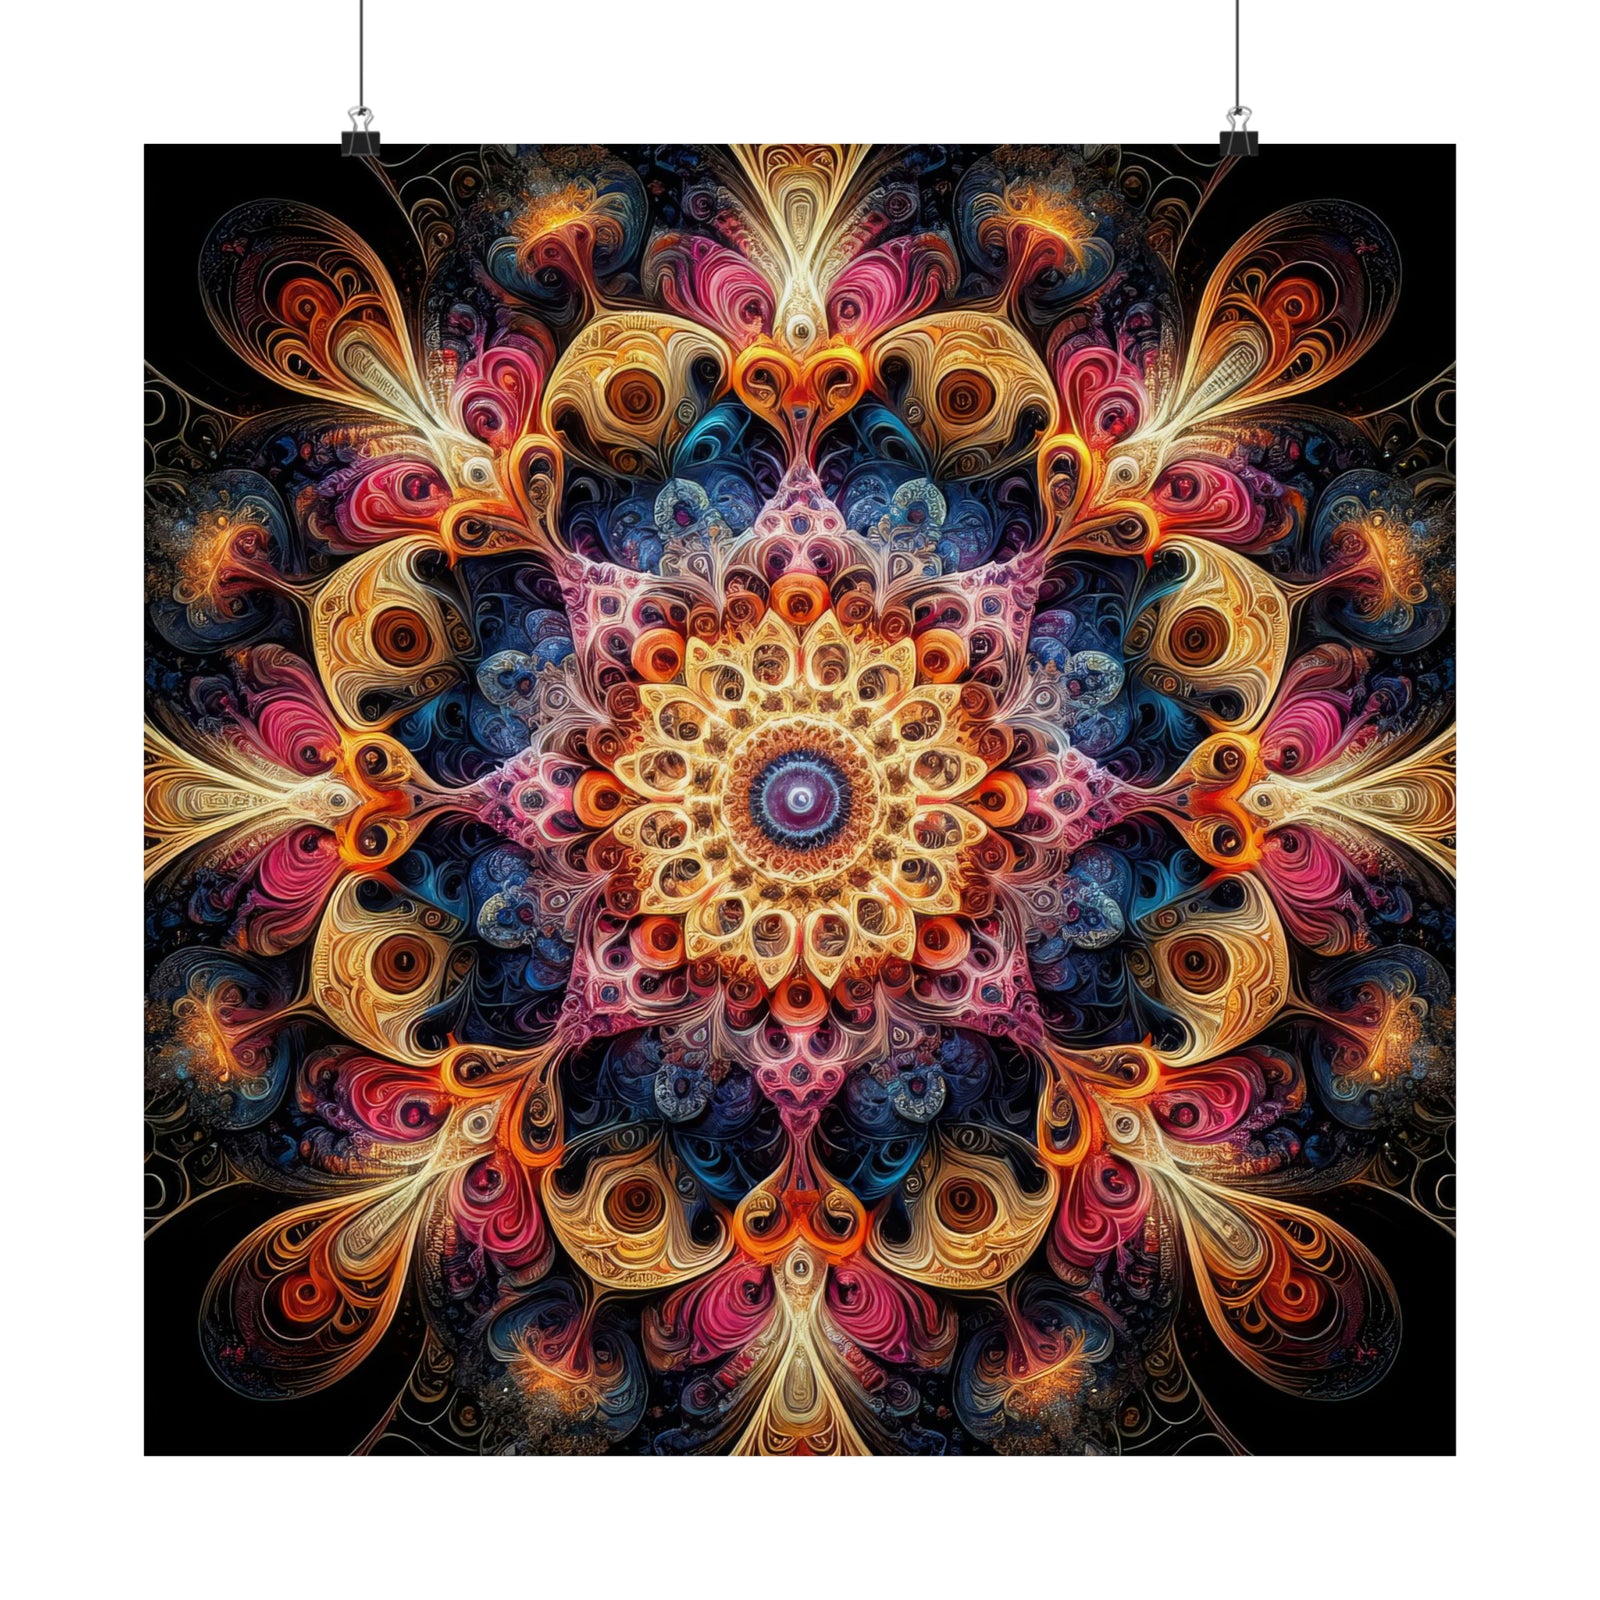 The Eternal Mandala of the Mind Poster